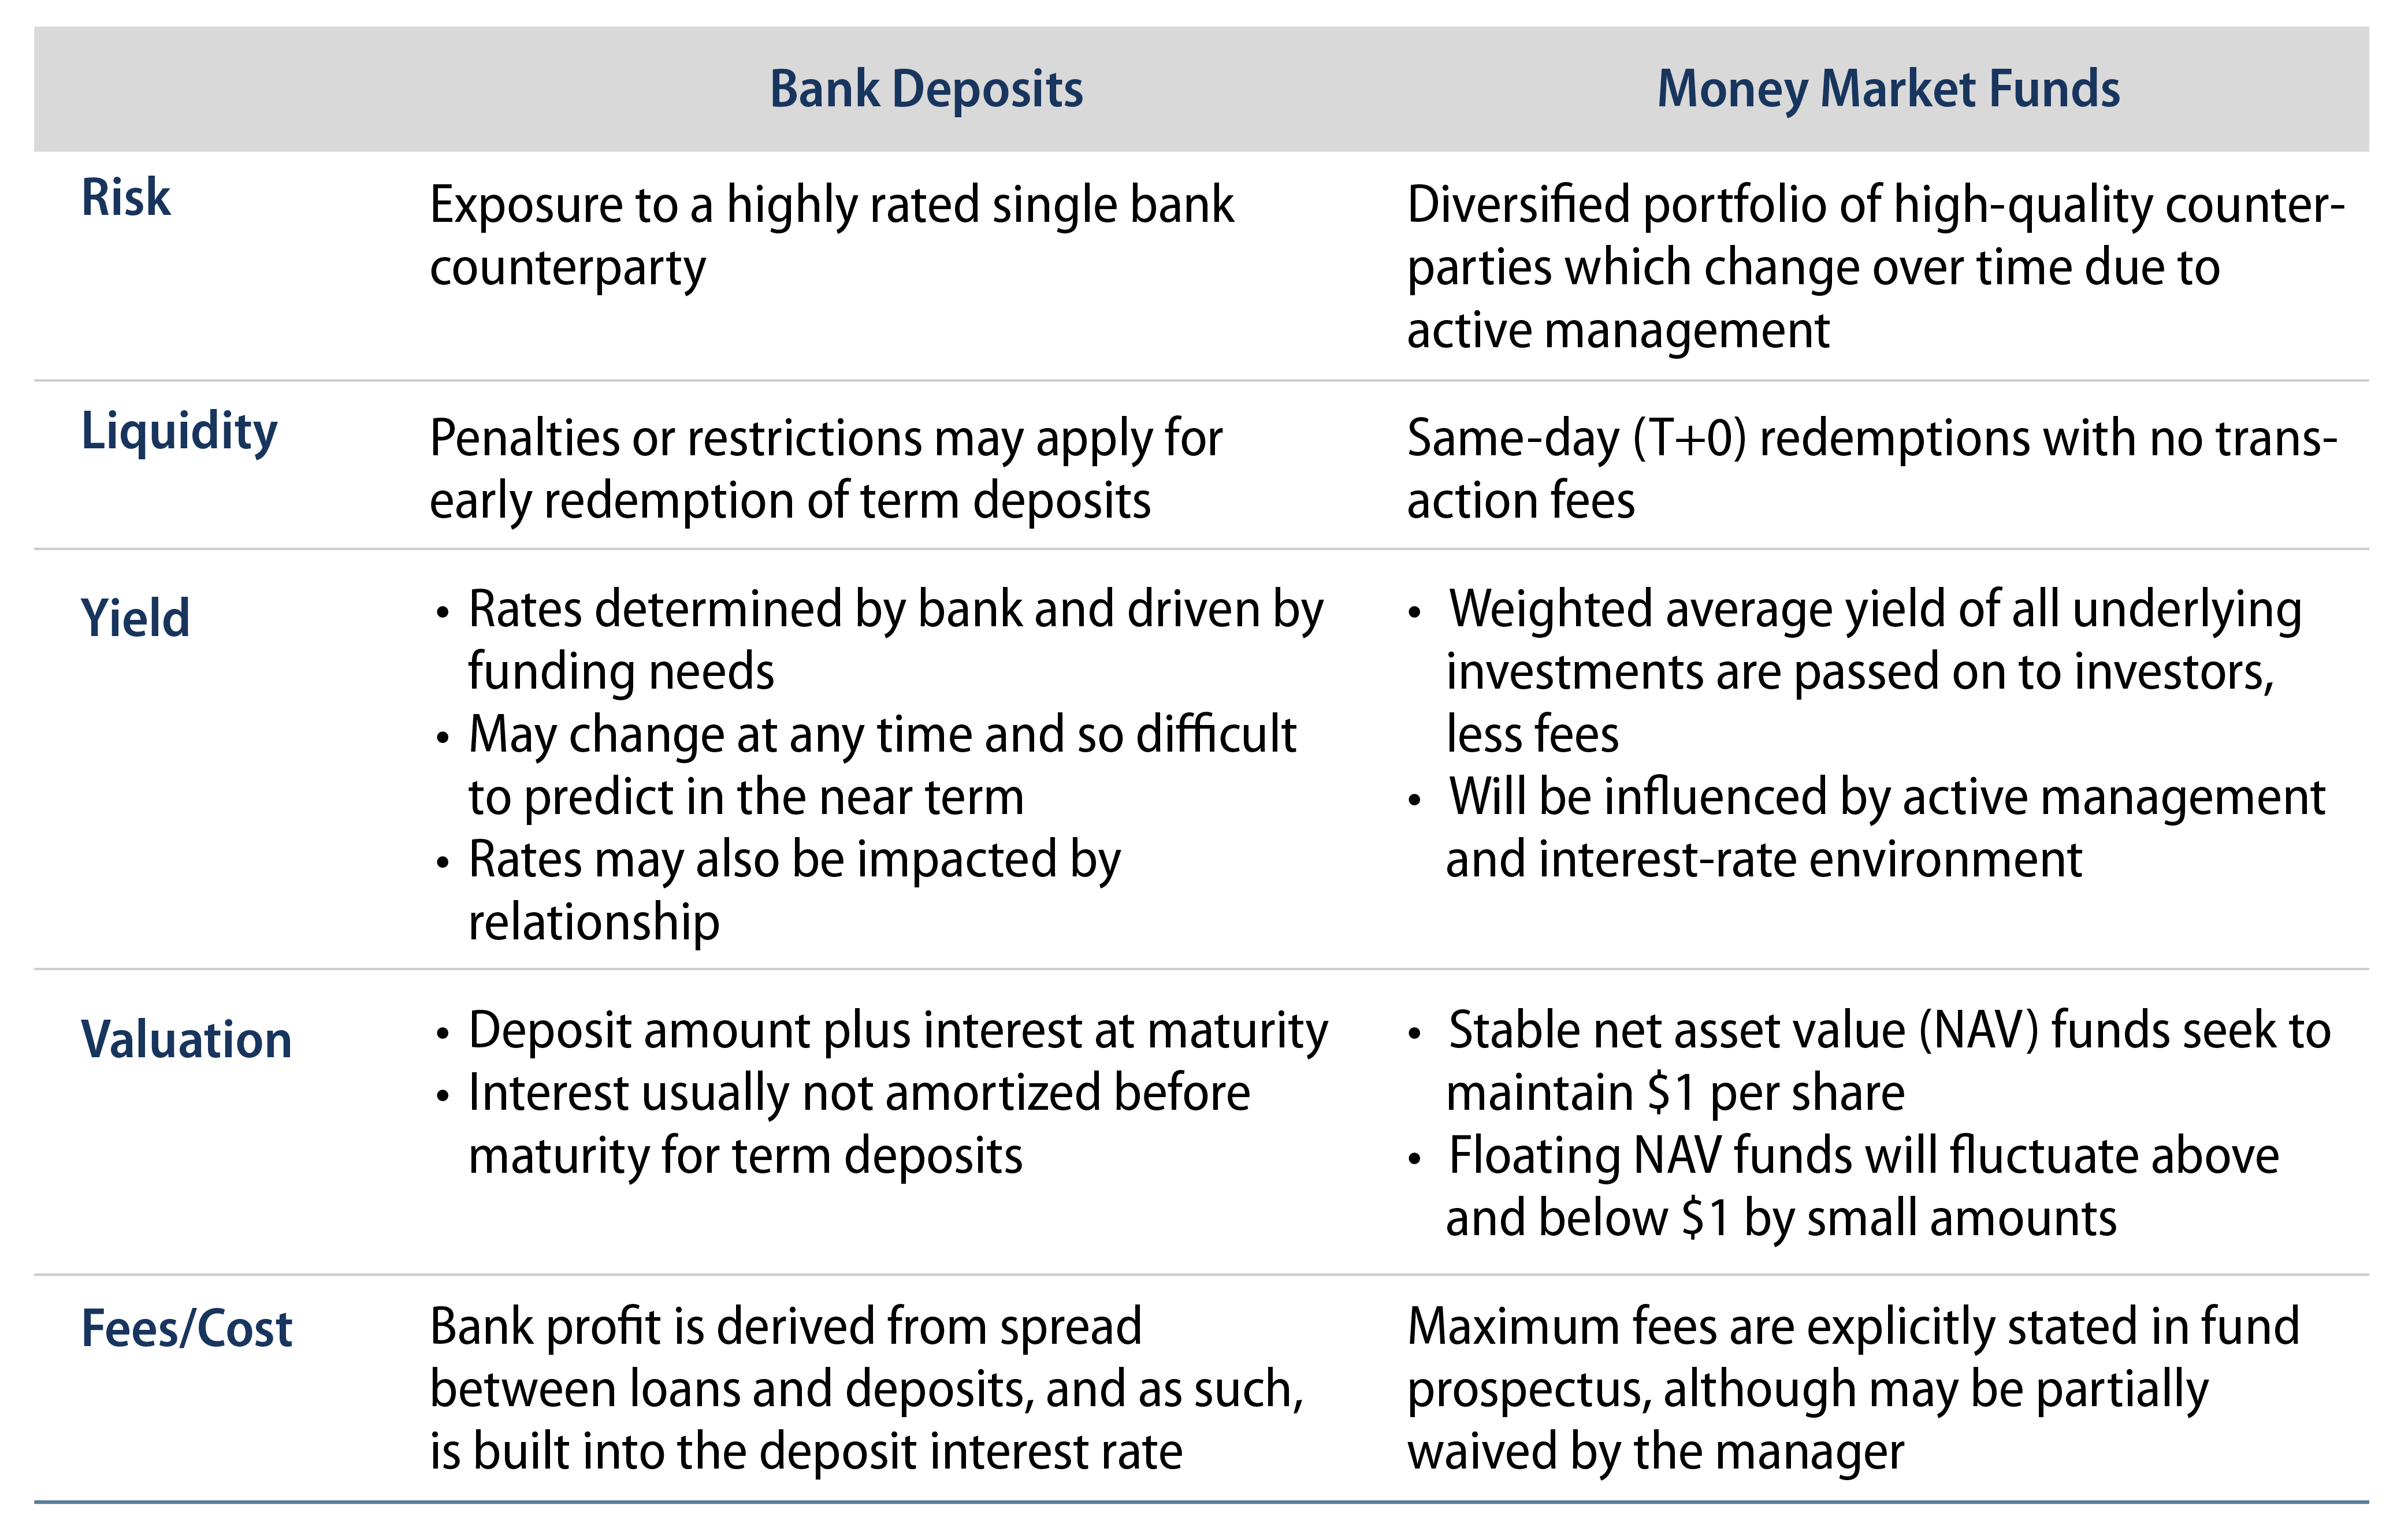 Features of Money Market Funds and Bank Deposits